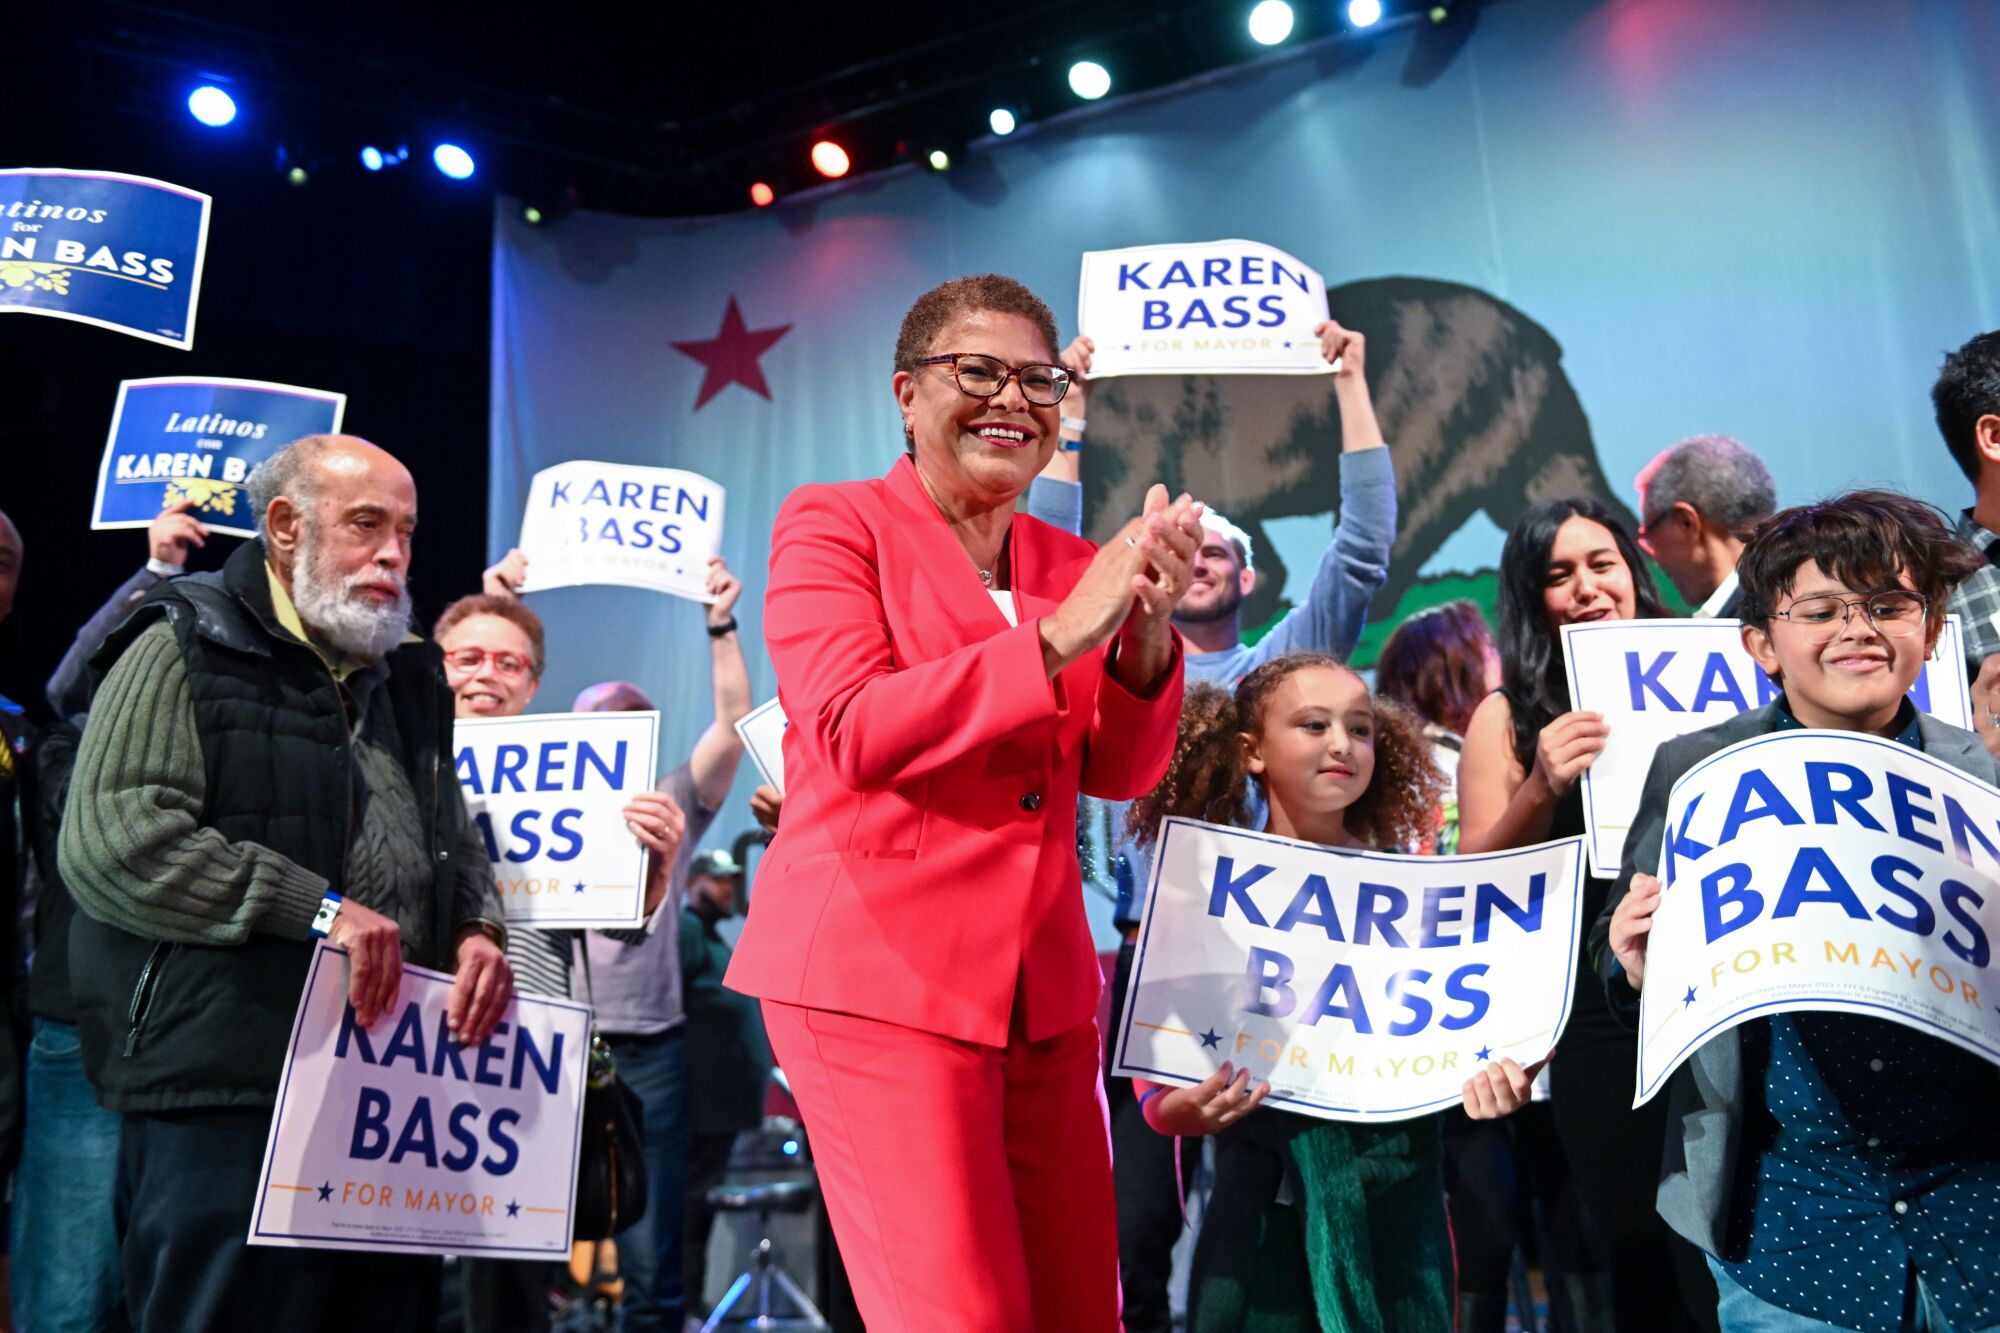 Rep. Karen Bass speaks during an election night rally in Los Angeles.